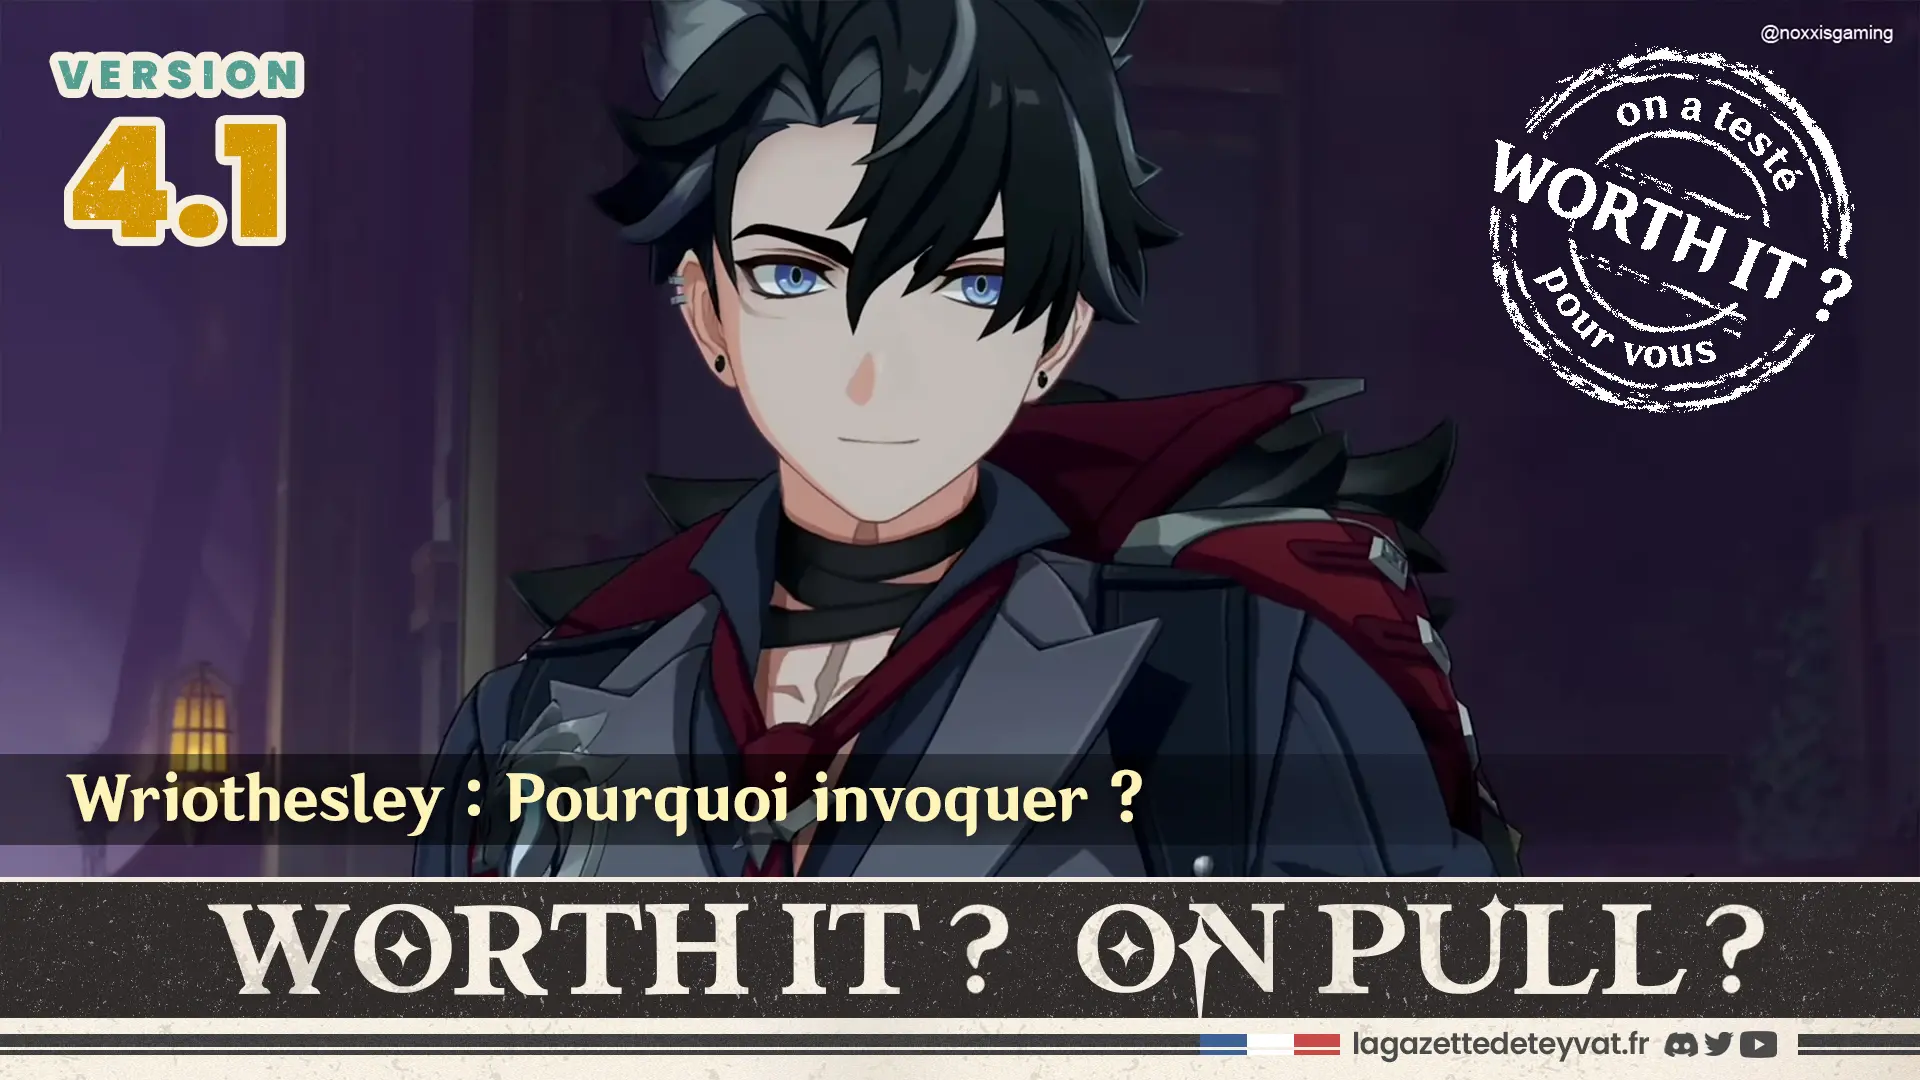 Wriothesley Genshin Impact, analyse du personnage à invoquer, lore, gameplay et design